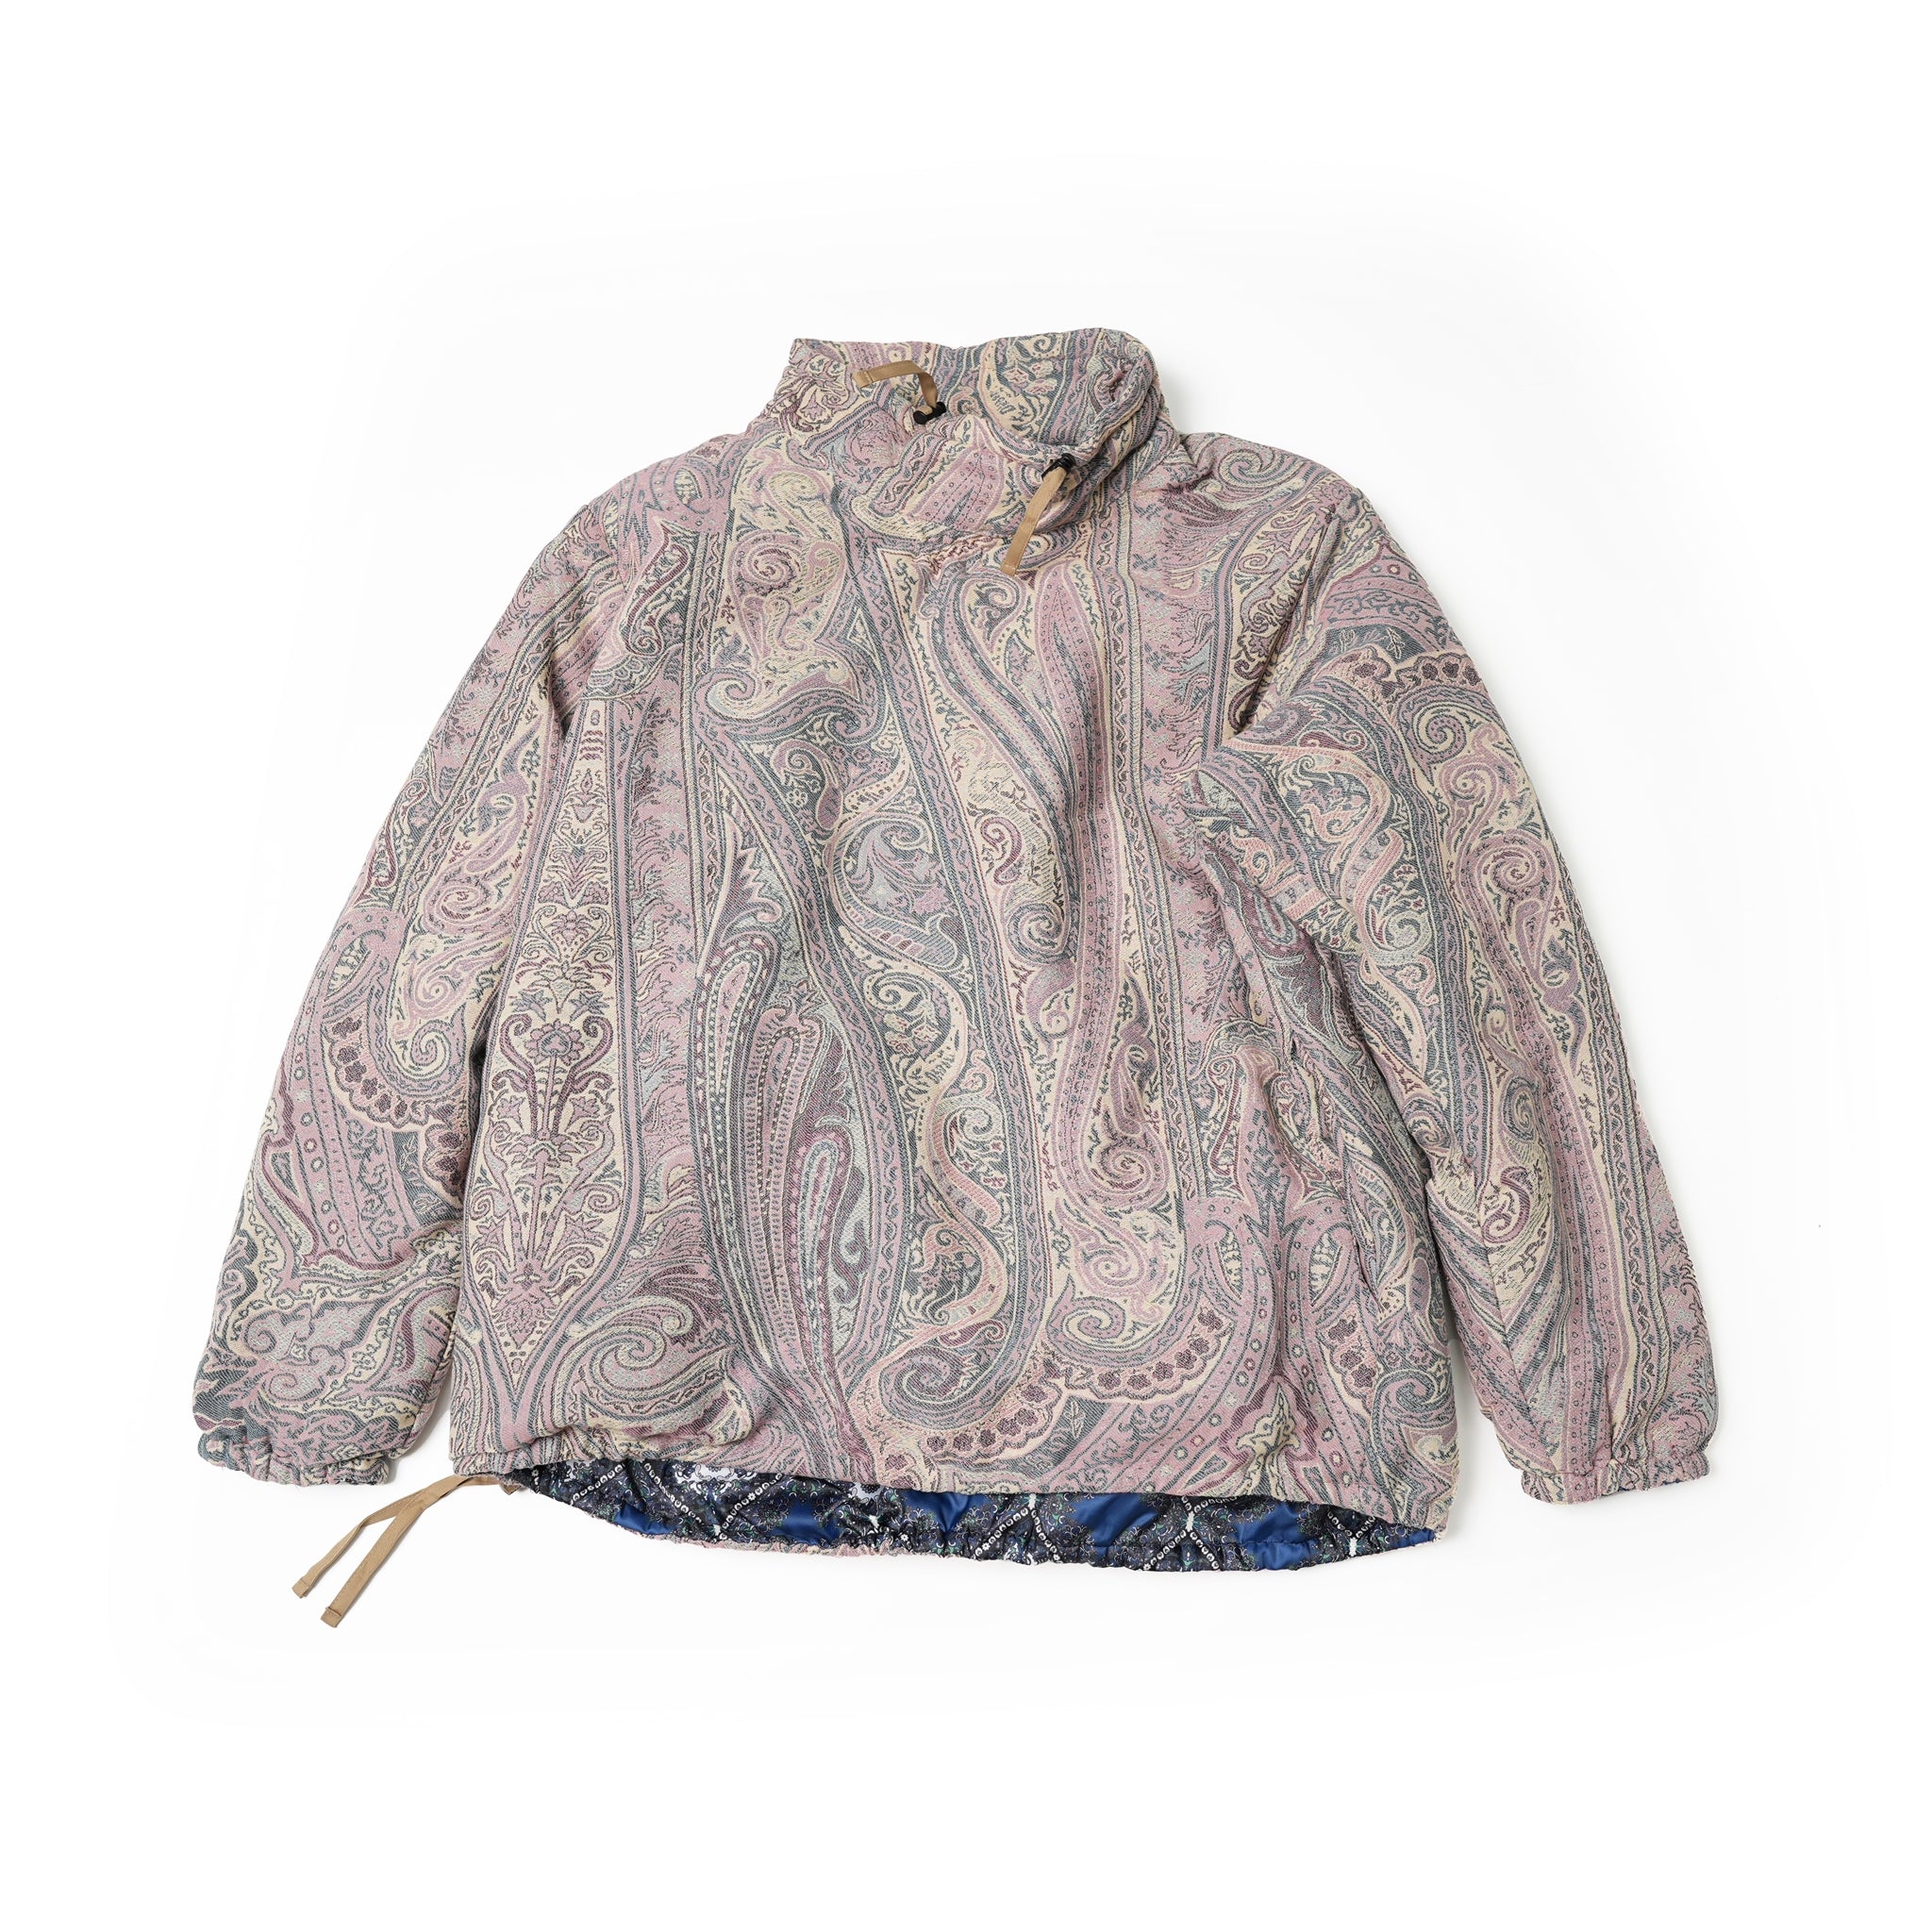 No:M32503-16 | Name:Insulated Mock Neck Pullover | Color:Betro Paisley Pink【MONITALY_モニタリー】